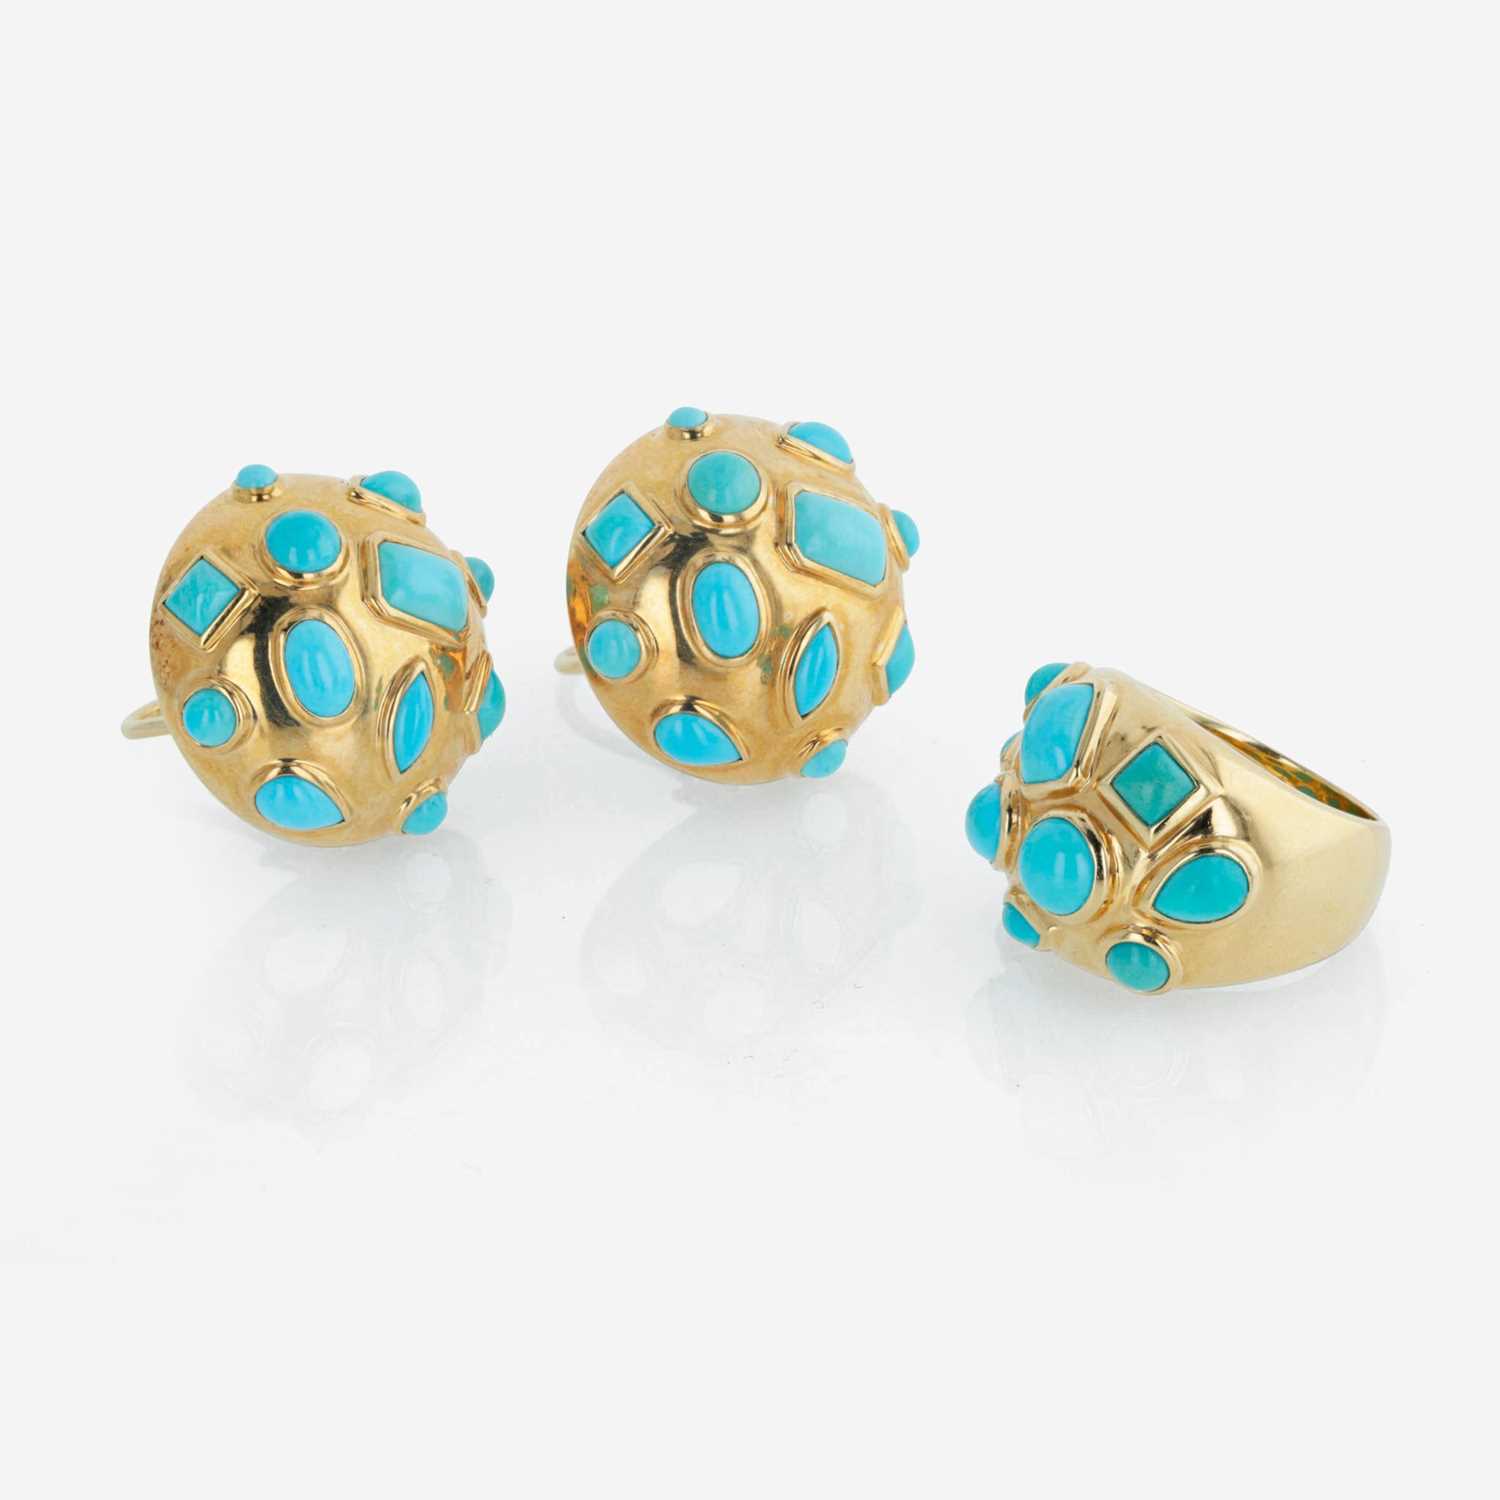 Lot 49 - An 18K yellow gold and turquoise ring and earrings suite, Seaman Schepps